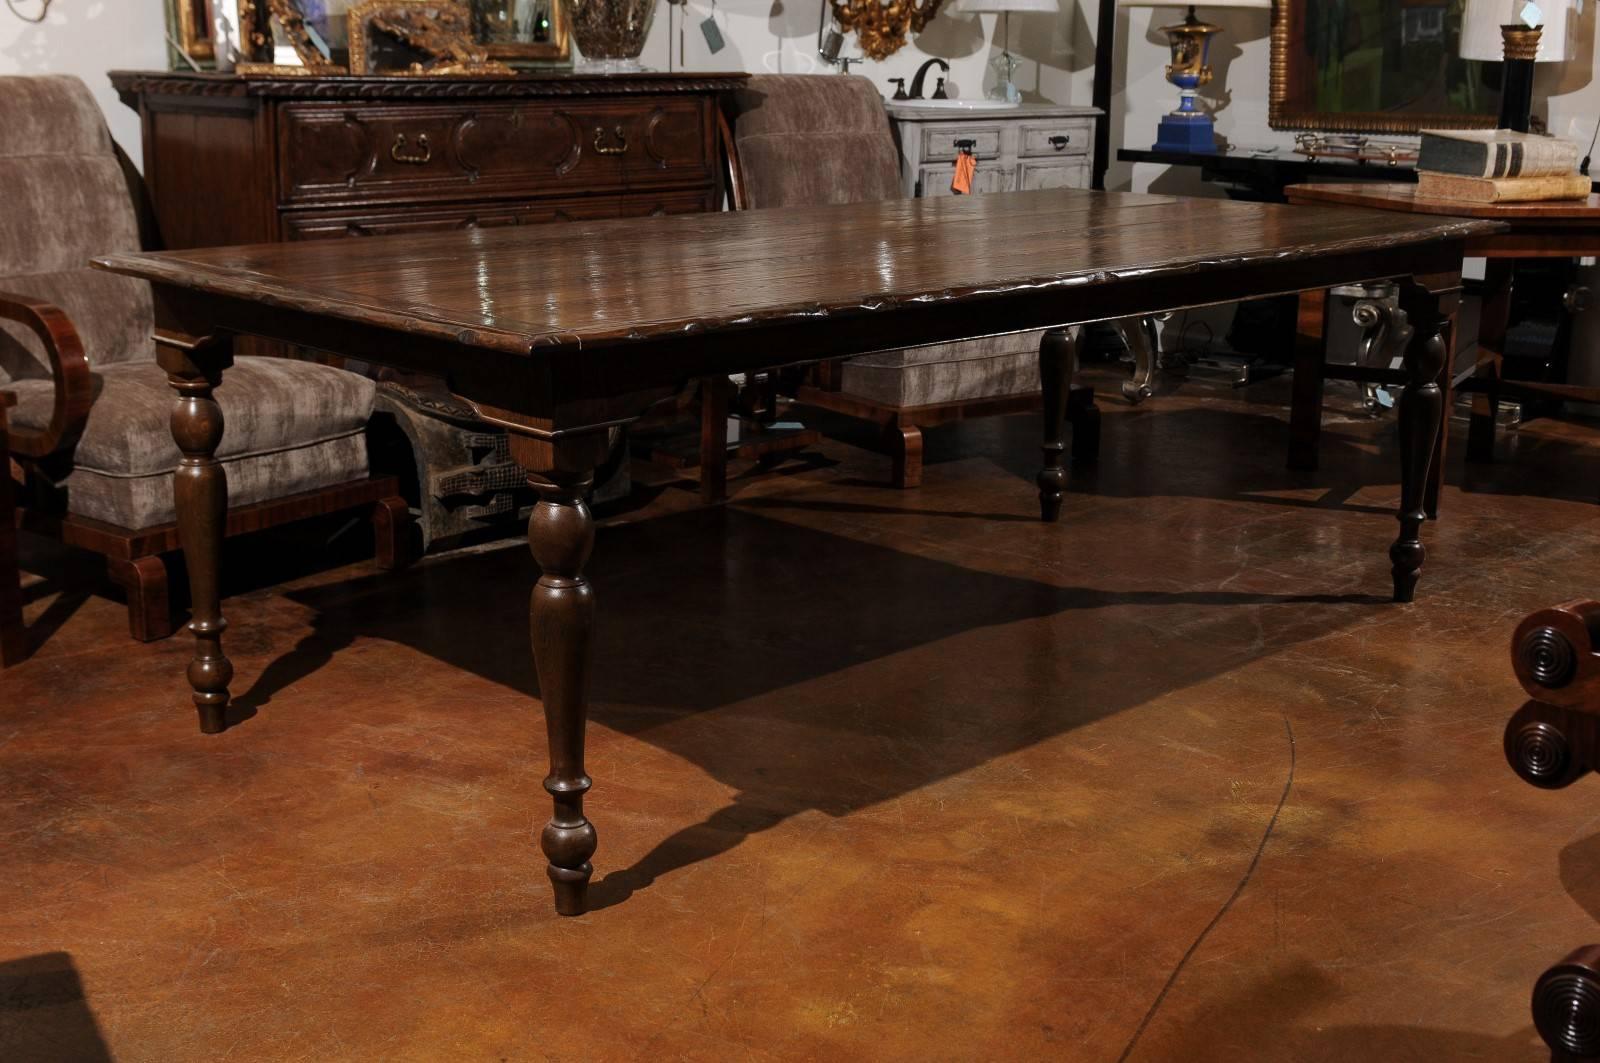 A contemporary custom-made American farm table with turned legs that can be made in any size. This dining room table features a rectangular planked top with knotted edges sitting above a bracketed apron delicately outlined by a thin molding. The